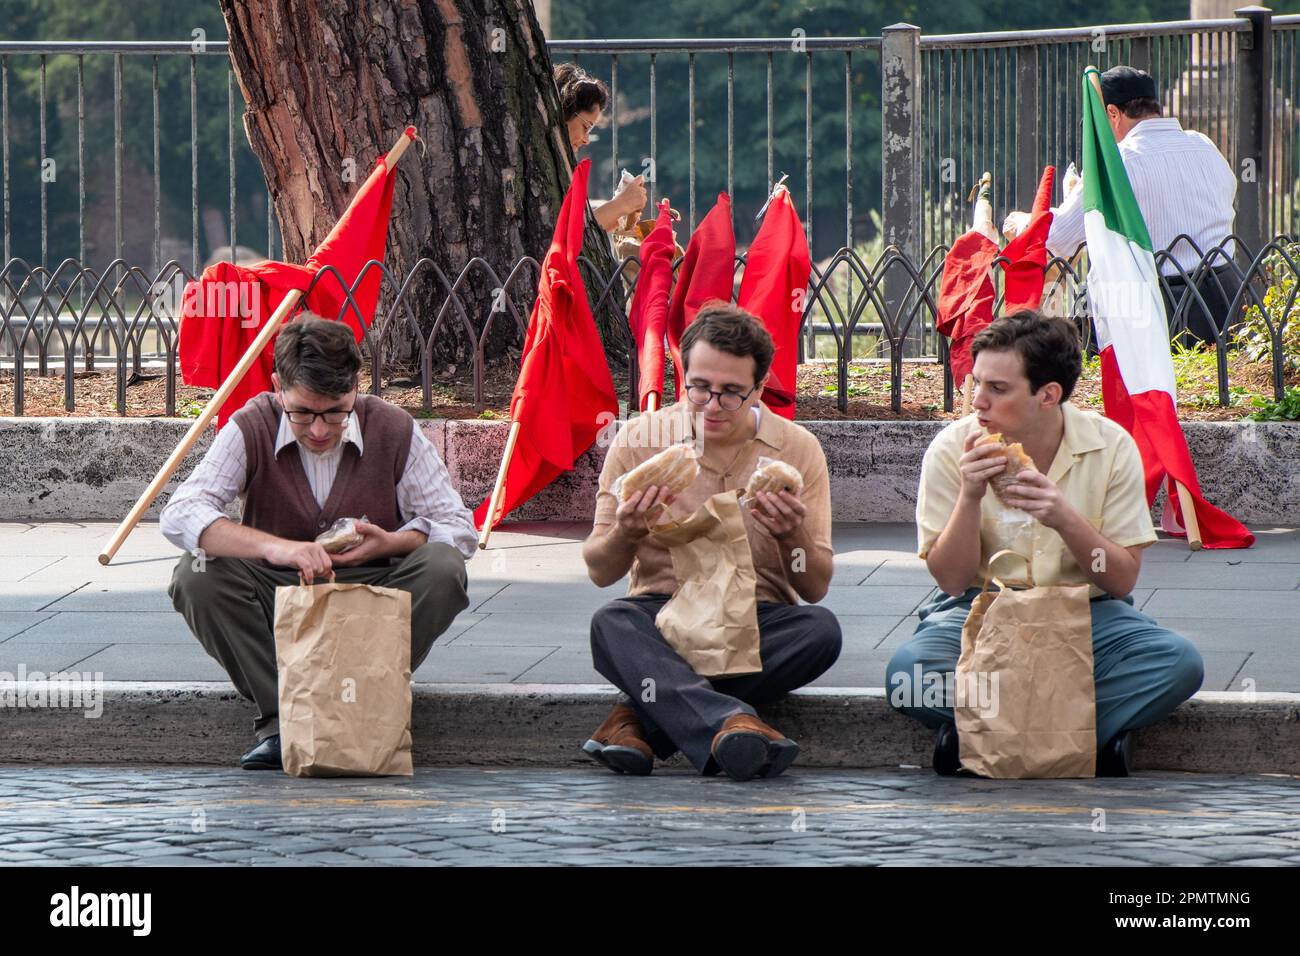 Rome, Italy. 08th Oct, 2022. Some actors take a break during the shooting. The new film 'Il sol dell'avvenire' (The sun of the future) by Italian director Nanni Moretti will compete for the Palme d'Or at the 2023 Cannes Film Festival. Set between the 1950s and 1970s in the world of circus and cinema, it will be released in Italian cinemas on 20 April 2023 distributed by 01 Distribution, before moving onto the Croisette in May. The director will turn 70 on August 19, 2023. (Photo by Marcello Valeri/SOPA Images/Sipa USA) Credit: Sipa USA/Alamy Live News Stock Photo